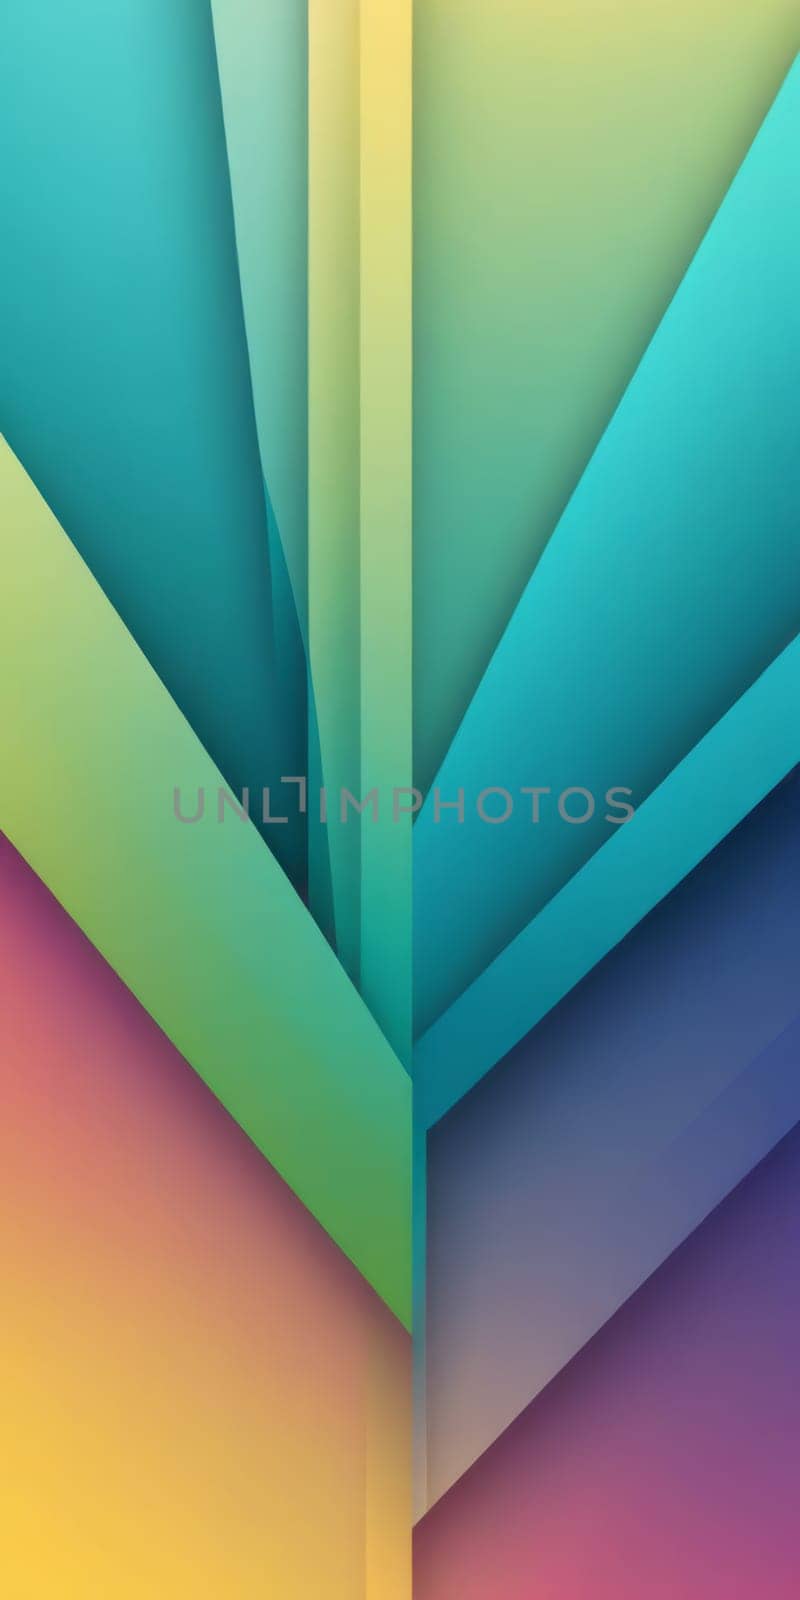 Arrow Shapes in Teal and Yellow by nkotlyar